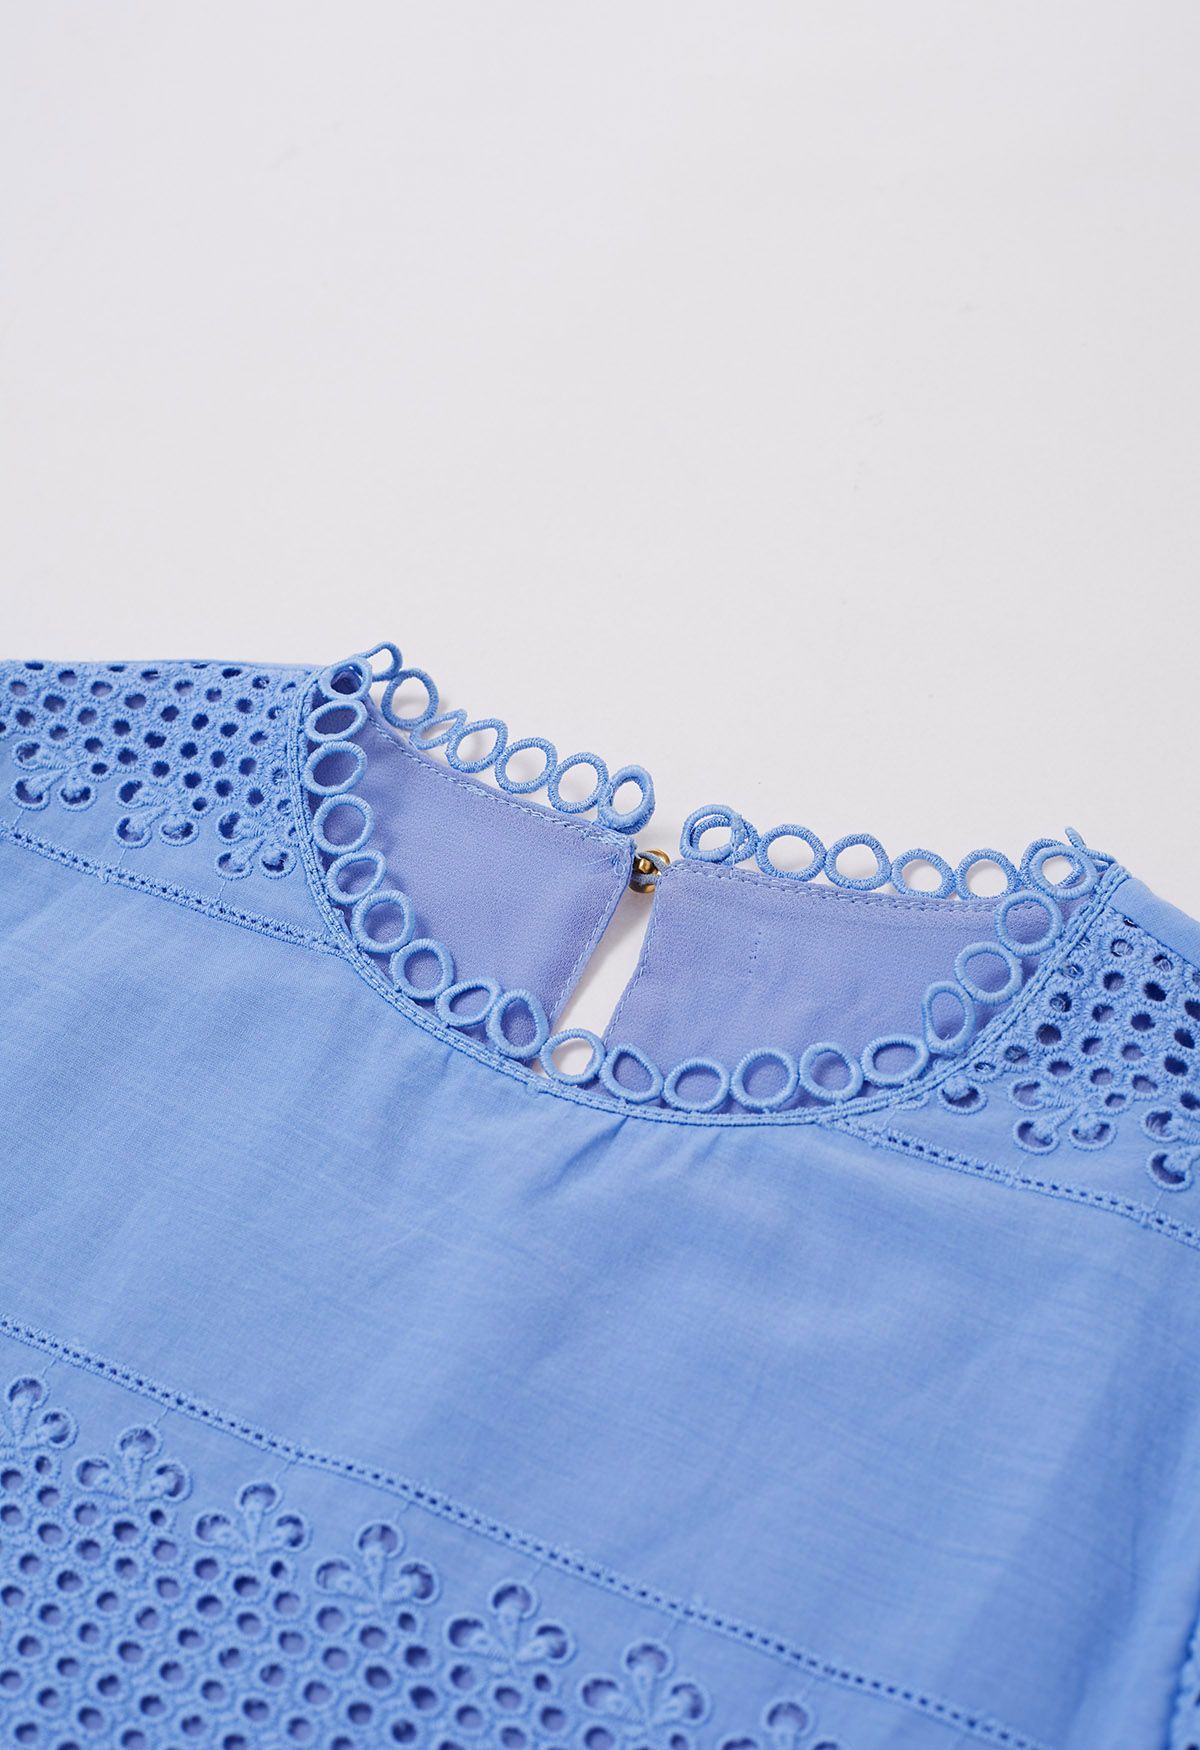 Boho Chic Eyelet Embroidered Cotton Top in Blue